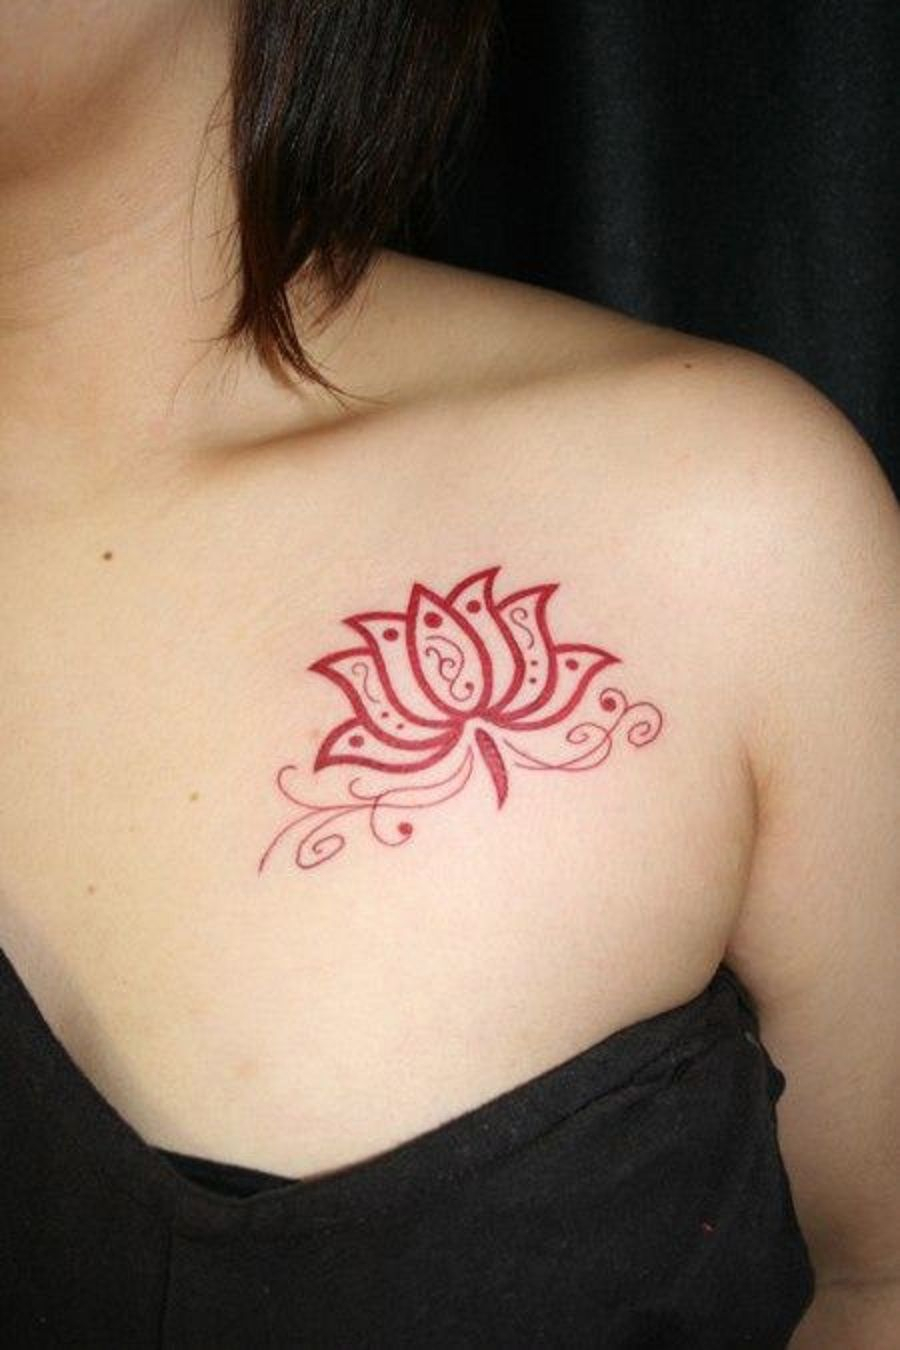 Girl Chest Tattoo Designs Arm Tattoo Sites,Living Room Top Interior Designers In India